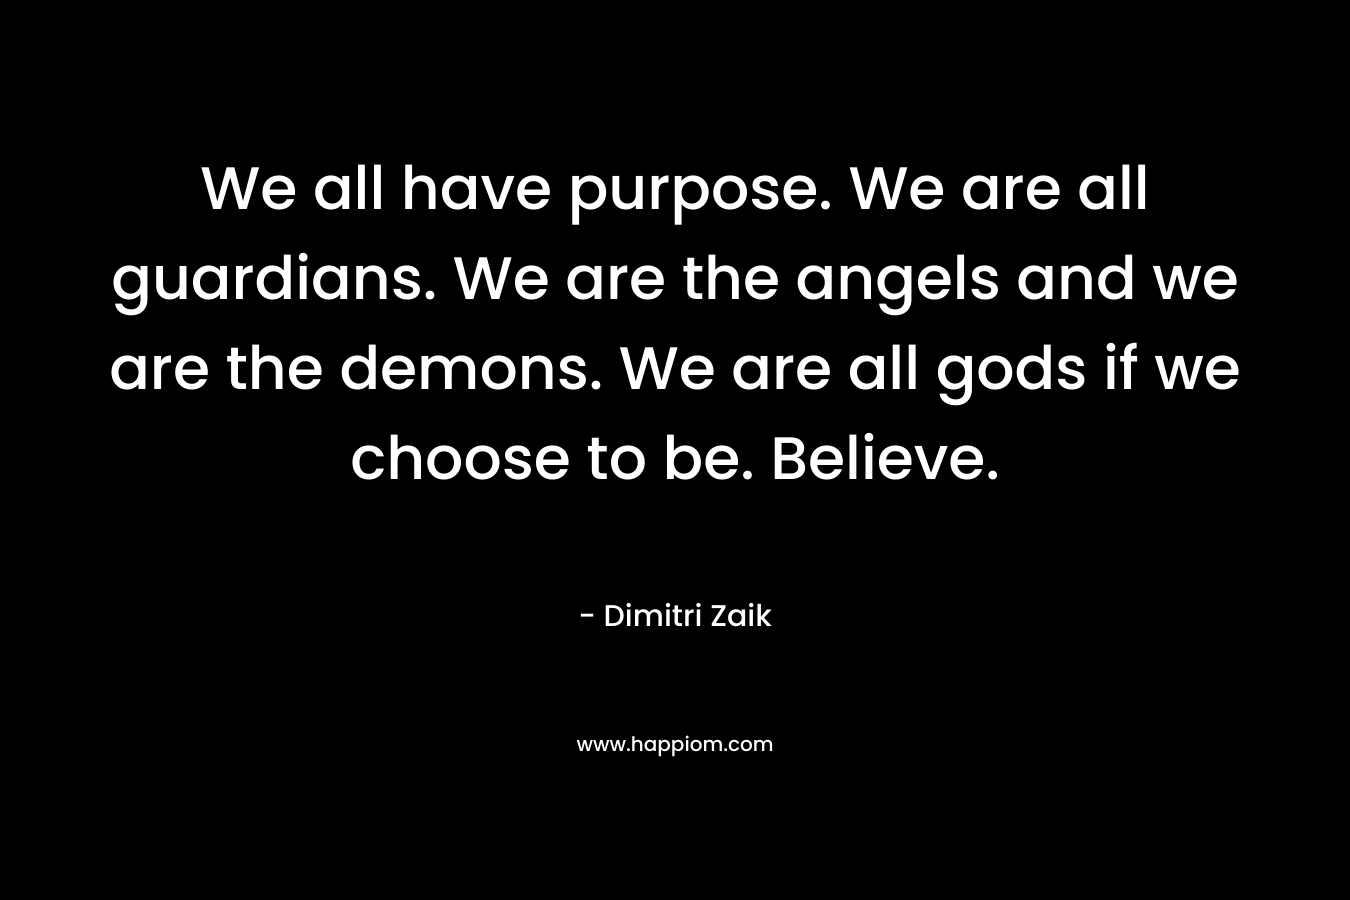 We all have purpose. We are all guardians. We are the angels and we are the demons. We are all gods if we choose to be. Believe. – Dimitri Zaik